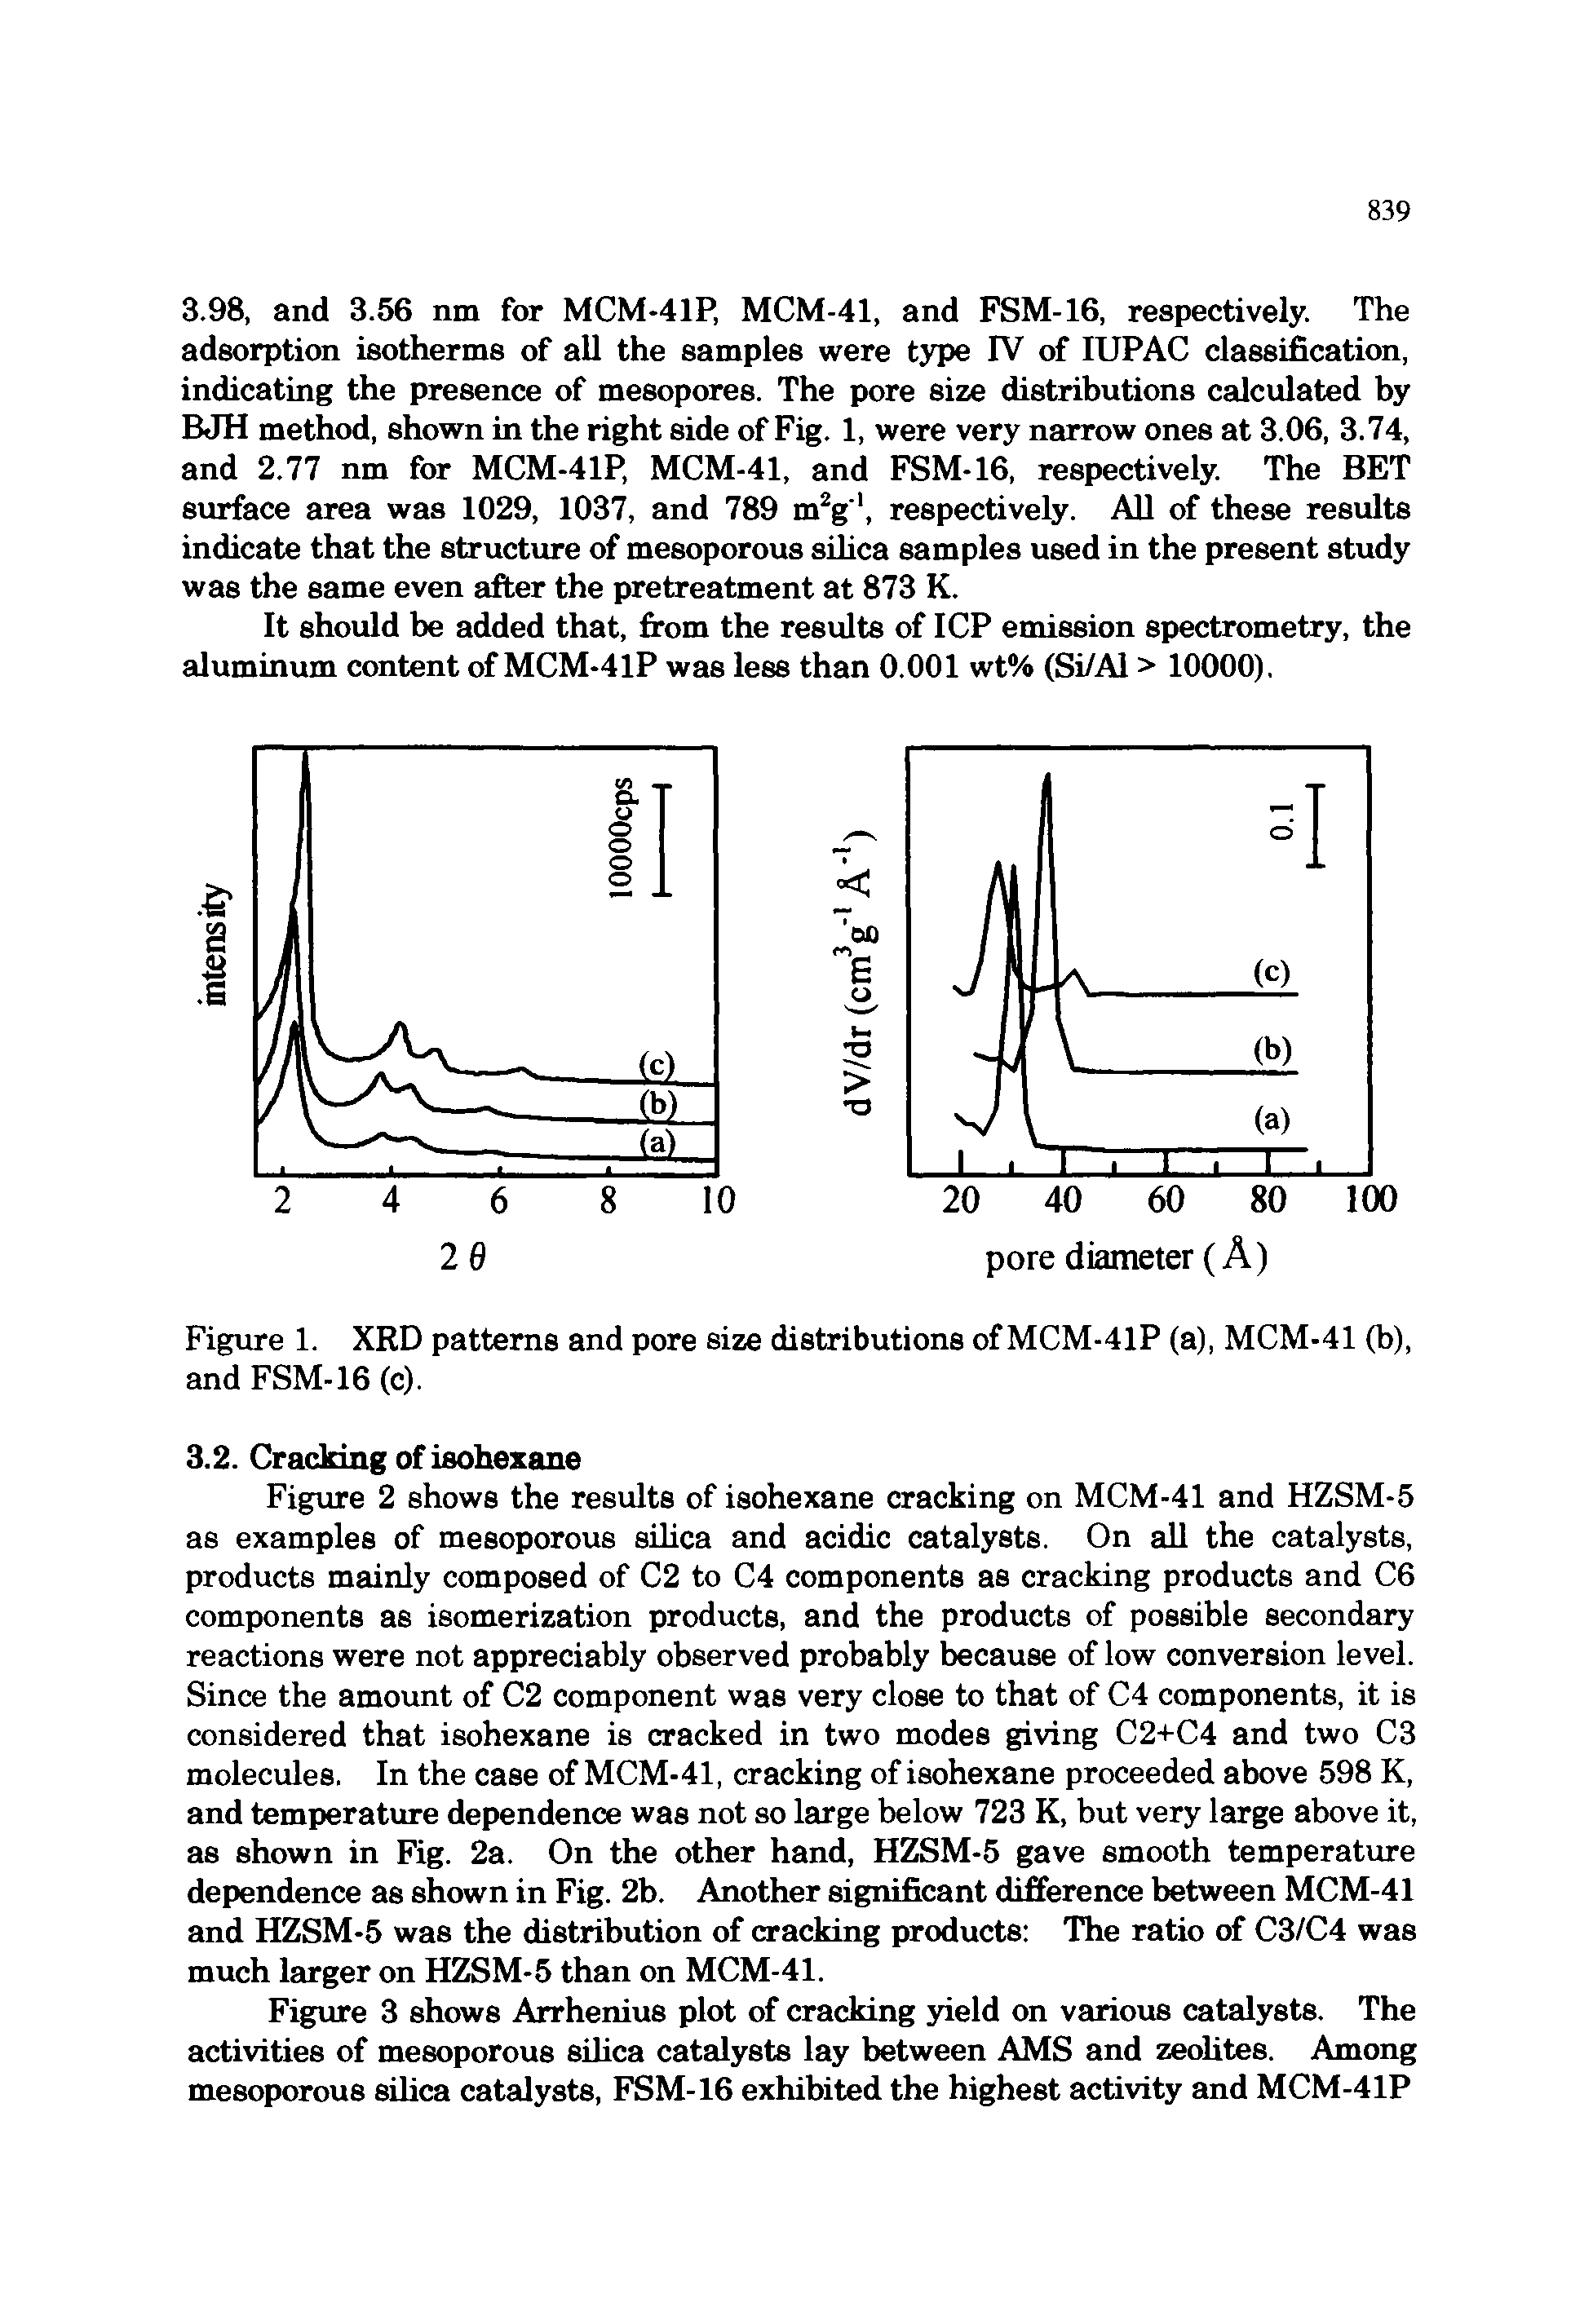 Figure 2 shows the results of isohexane cracking on MCM-41 and HZSM-5 as examples of mesoporous silica and acidic catalysts. On all the catalysts, products mainly composed of C2 to C4 components as cracking products and C6 components as isomerization products, and the products of possible secondary reactions were not appreciably observed probably because of low conversion level. Since the amount of C2 component was very close to that of C4 components, it is considered that isohexane is cracked in two modes giving C2+C4 and two C3 molecules. In the case of MCM-41, cracking of isohexane proceeded above 598 K, and temperature dependence was not so large below 723 K, but very large above it, as shown in Fig. 2a. On the other hand, HZSM-5 gave smooth temperature dependence as shown in Fig. 2b. Another significant difference between MCM-41 and HZSM-5 was the distribution of cracking products The ratio of C3/C4 was much larger on HZSM-5 than on MCM-41.